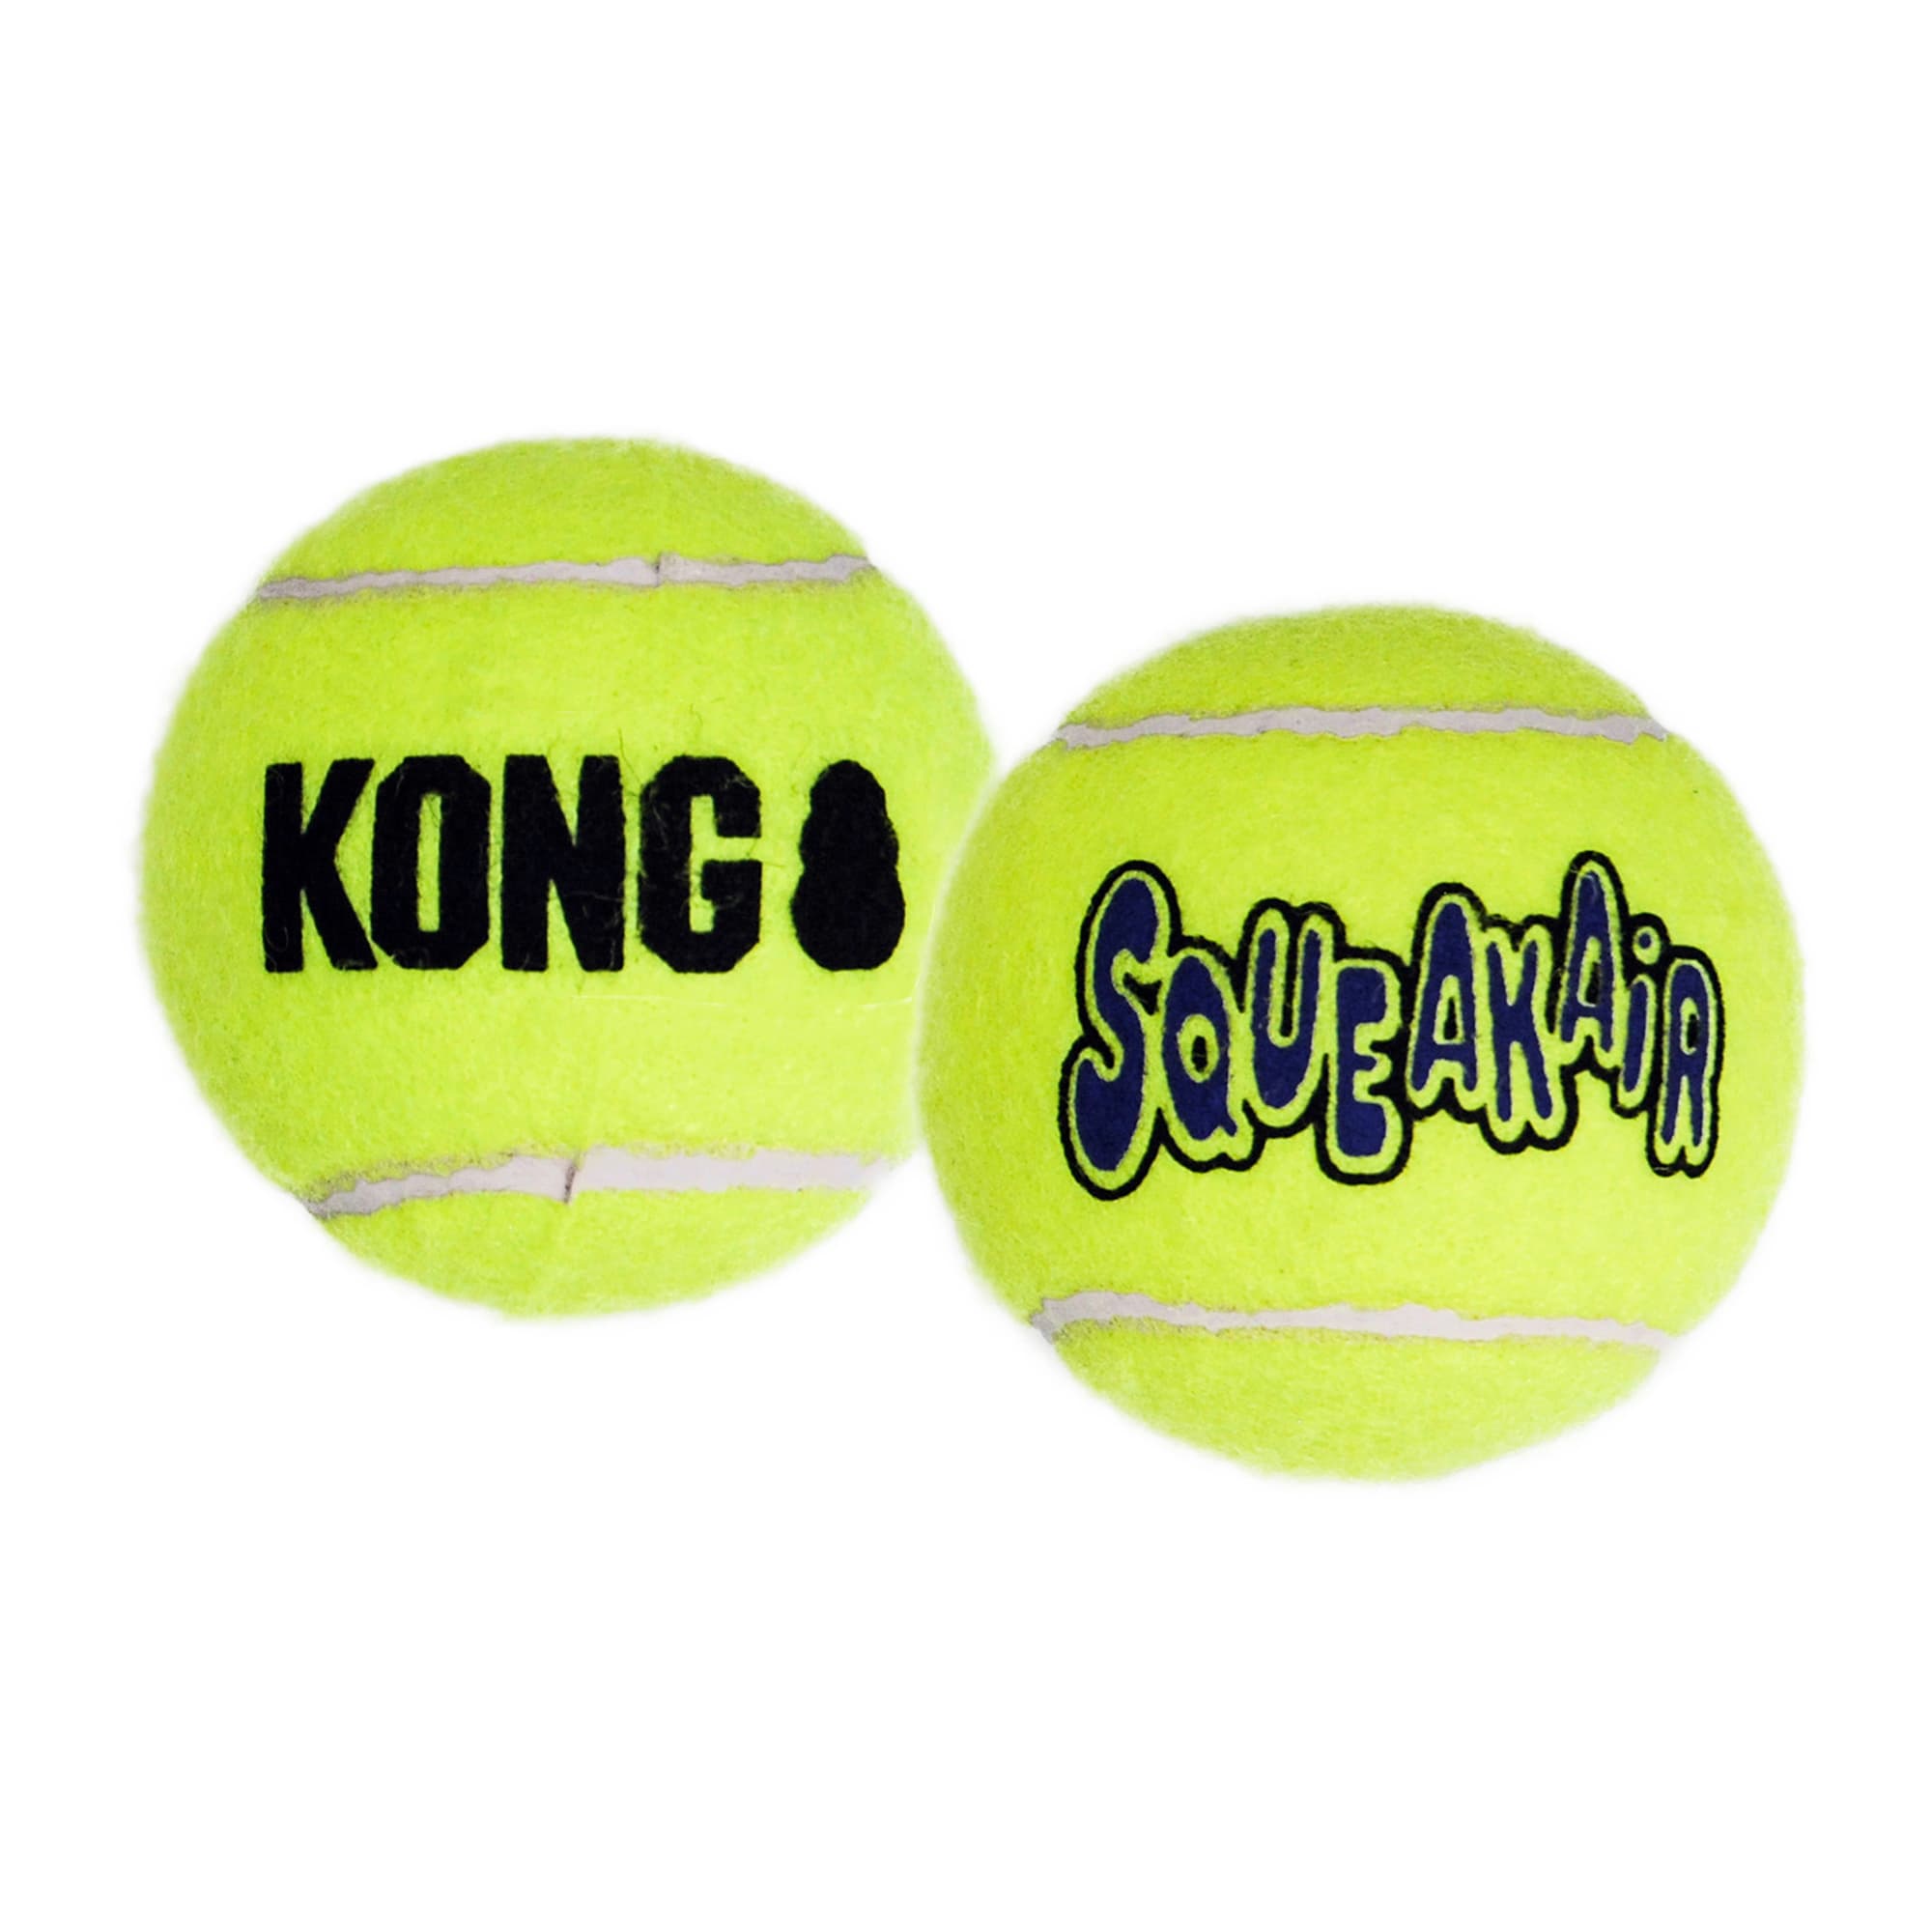 KONG AIR XS Tennis Balls Pack of 3 Dog Toy Squeaker Extra Small Puppies Mini